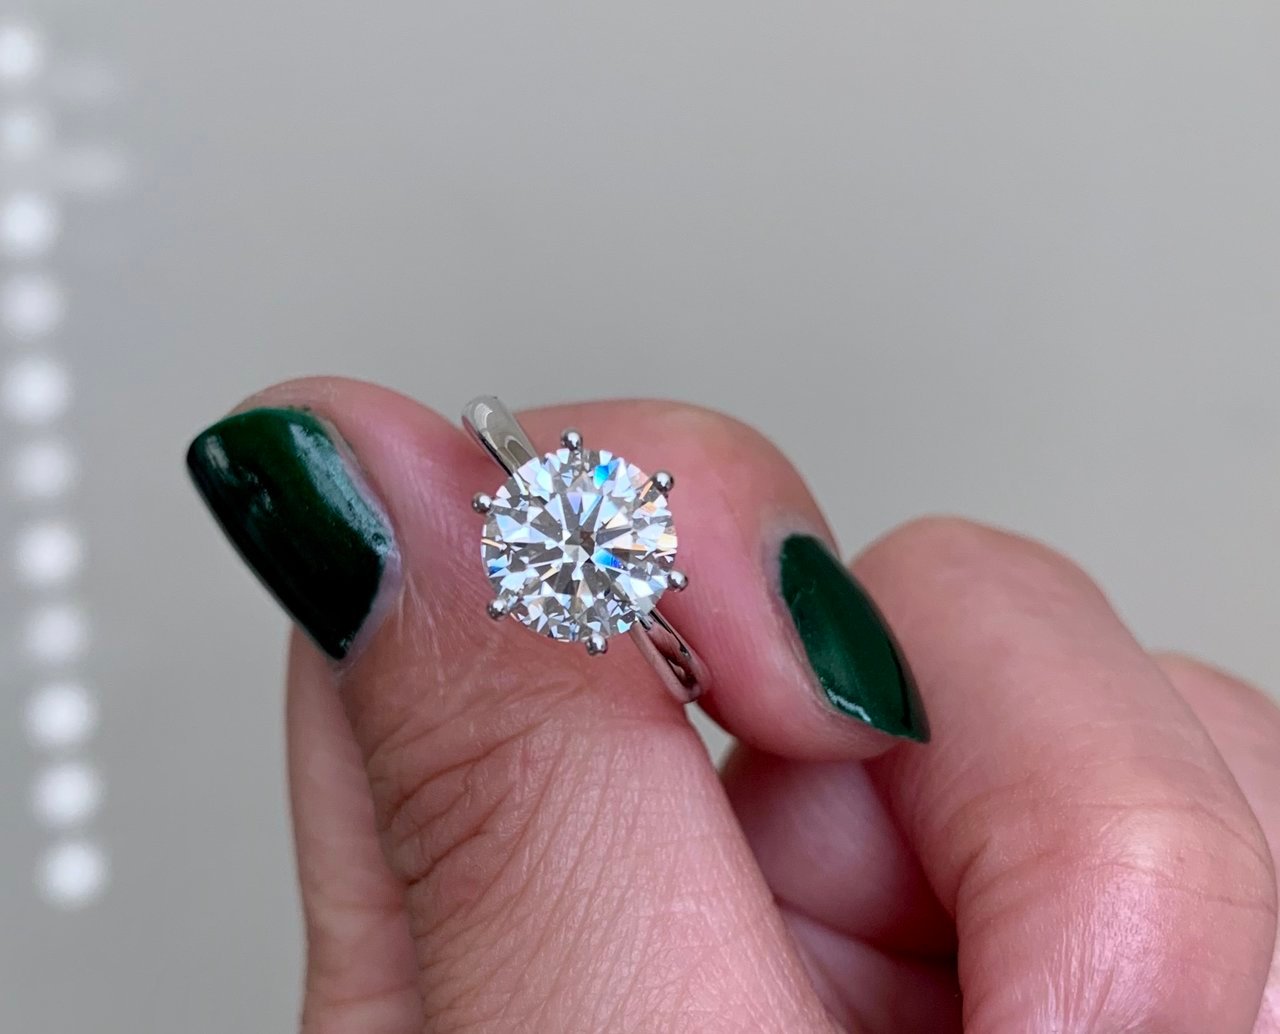 Julyisjuly originally posted this stunning 2+ ct ACA Engagement Ring on the Show Me the Bling Forum at PriceScope. It would be hard to go wrong with a classically beautiful solitaire, but this one is particularly gorgeous!